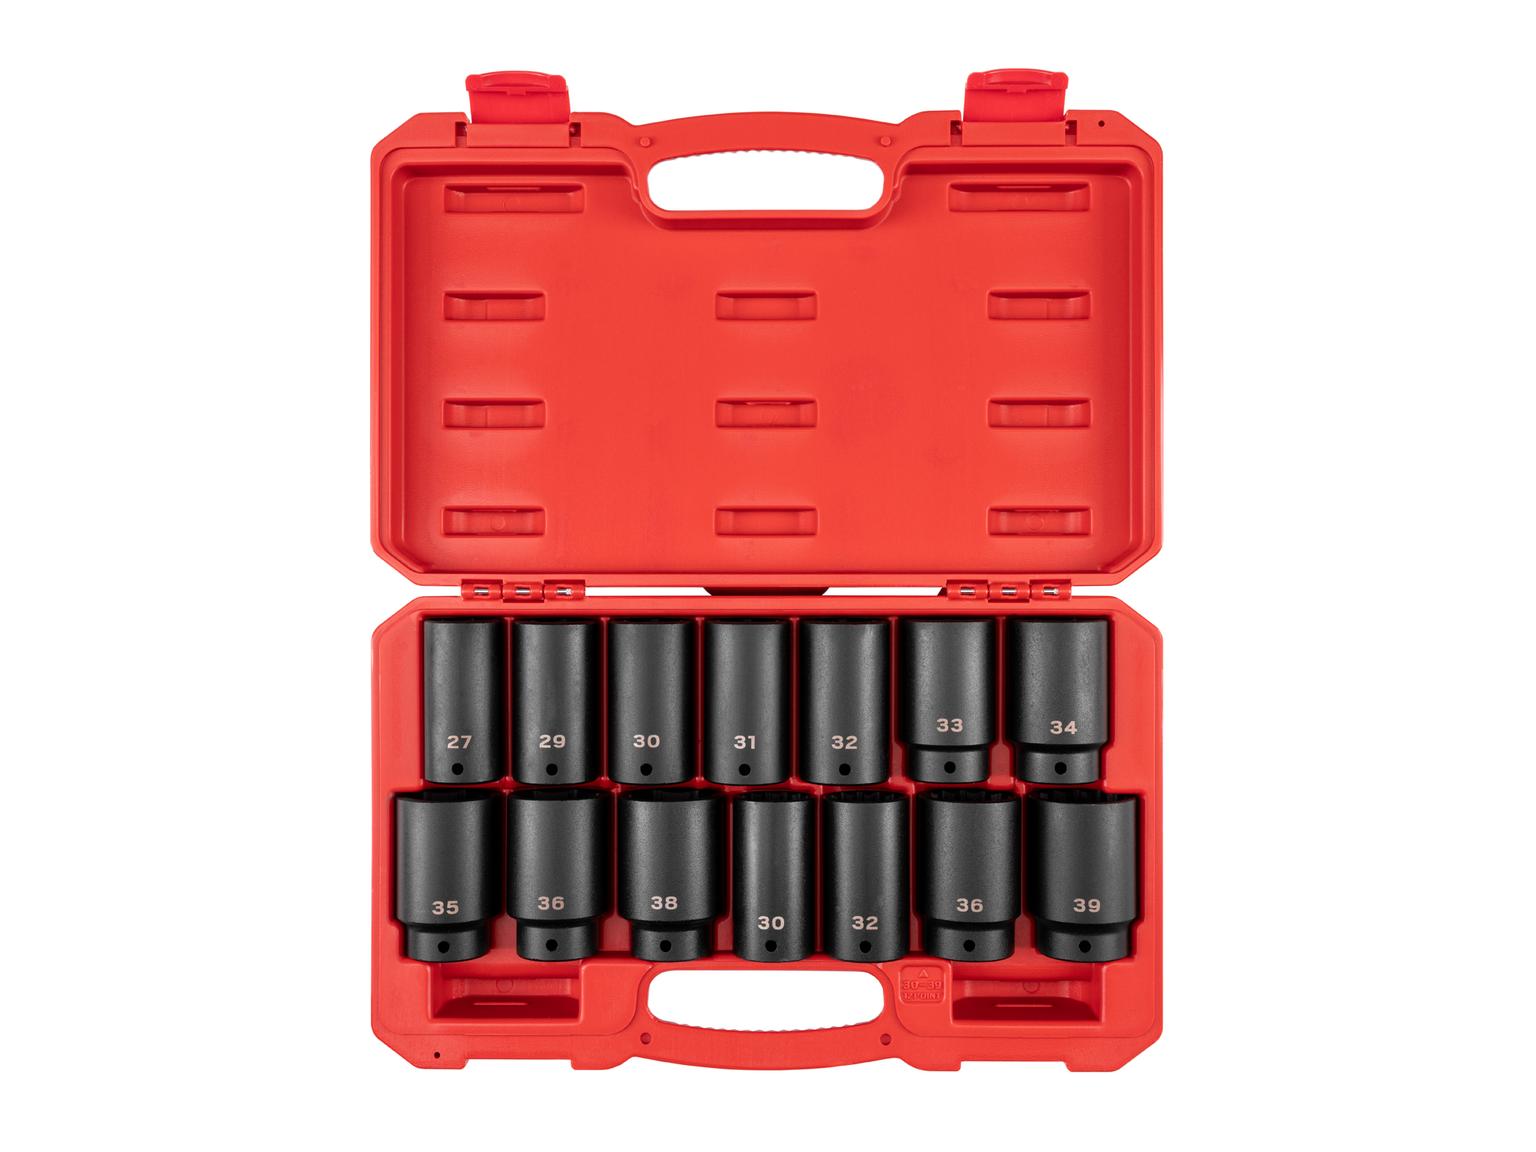 TEKTON SID92341-D 1/2 Inch Drive Deep 6-Point and 12-Point Axle Nut Impact Socket Set with Case, 14-Piece (27-39 mm)